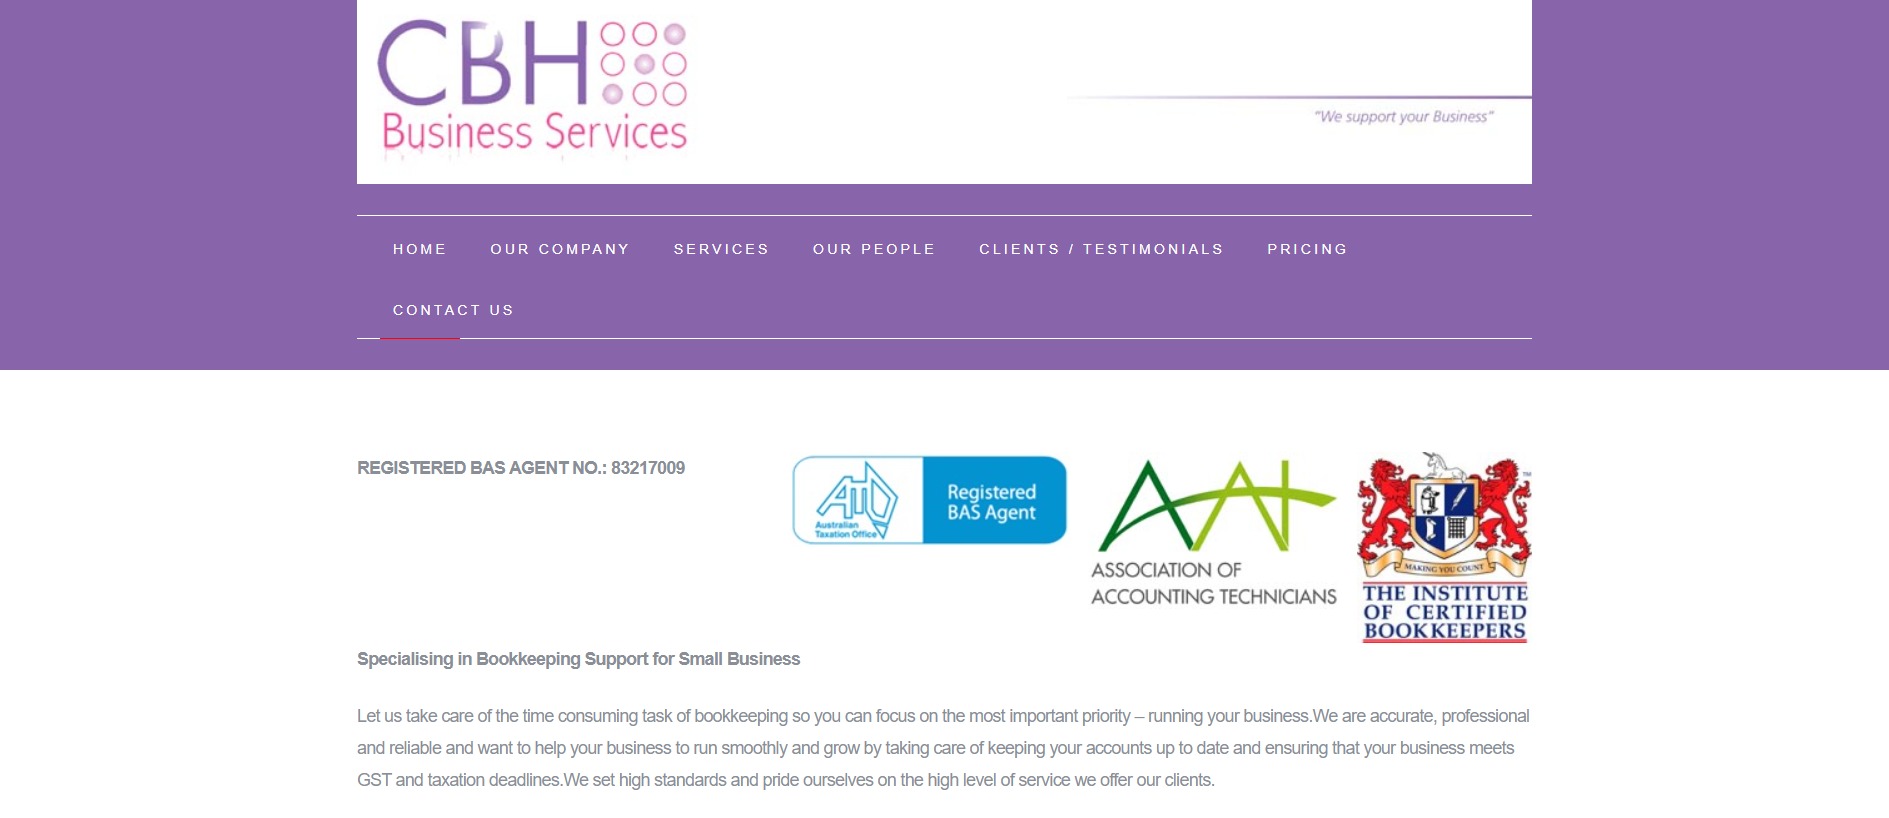 Cbh Business Services